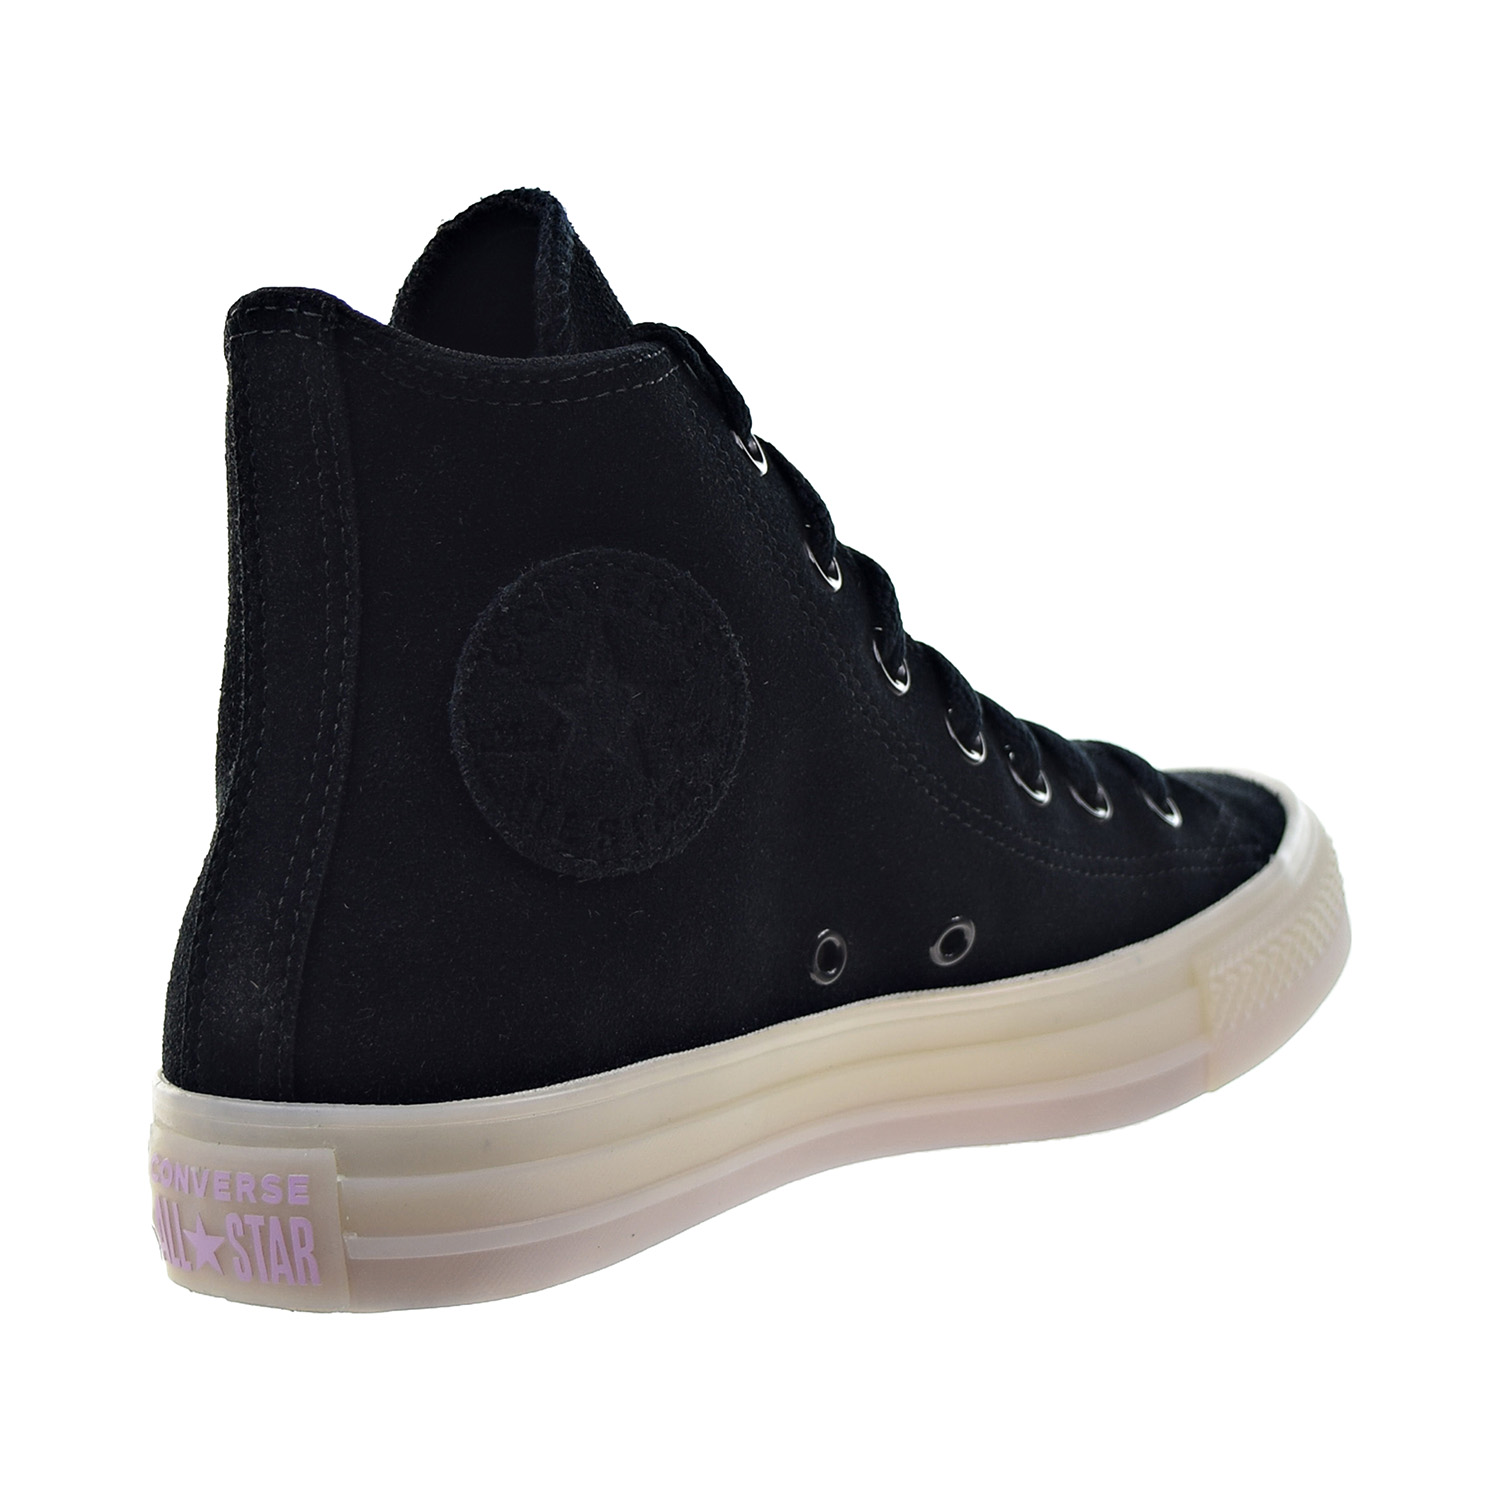 Converse Chuck Taylor All Star Men's Shoes Black-Lilac Mist 166138c - image 3 of 6